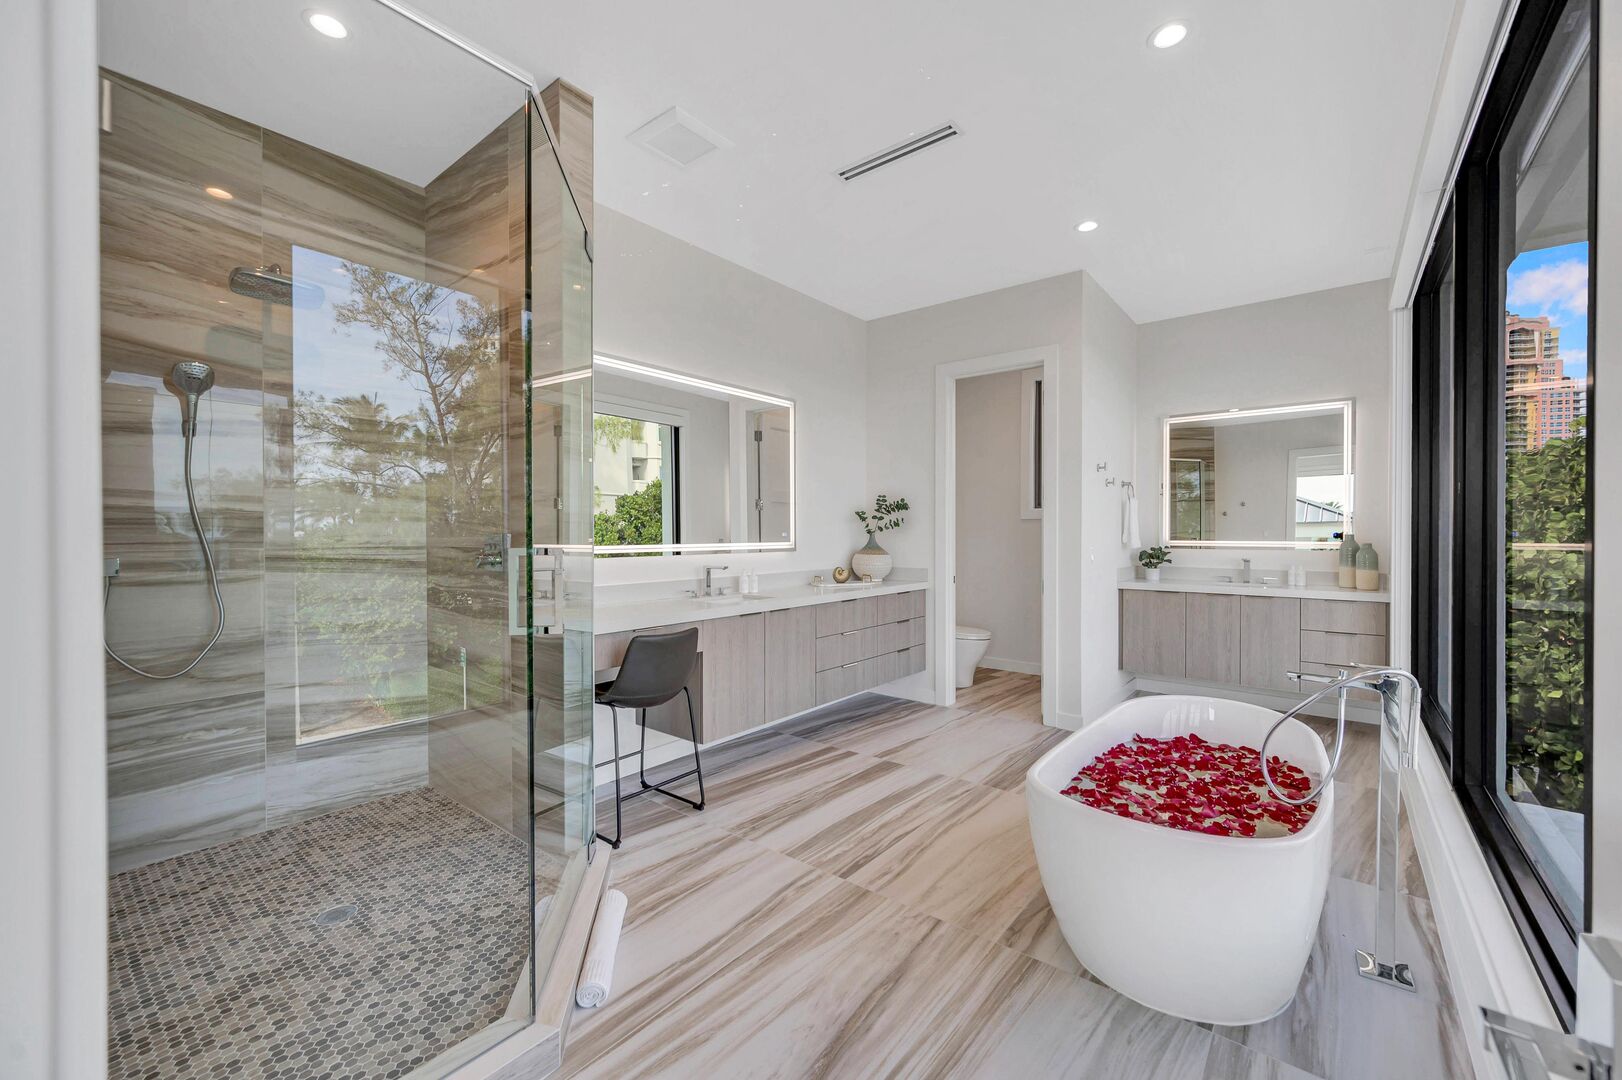 The primary bathroom featuring a bathtub, walk-in shower and two vanities.